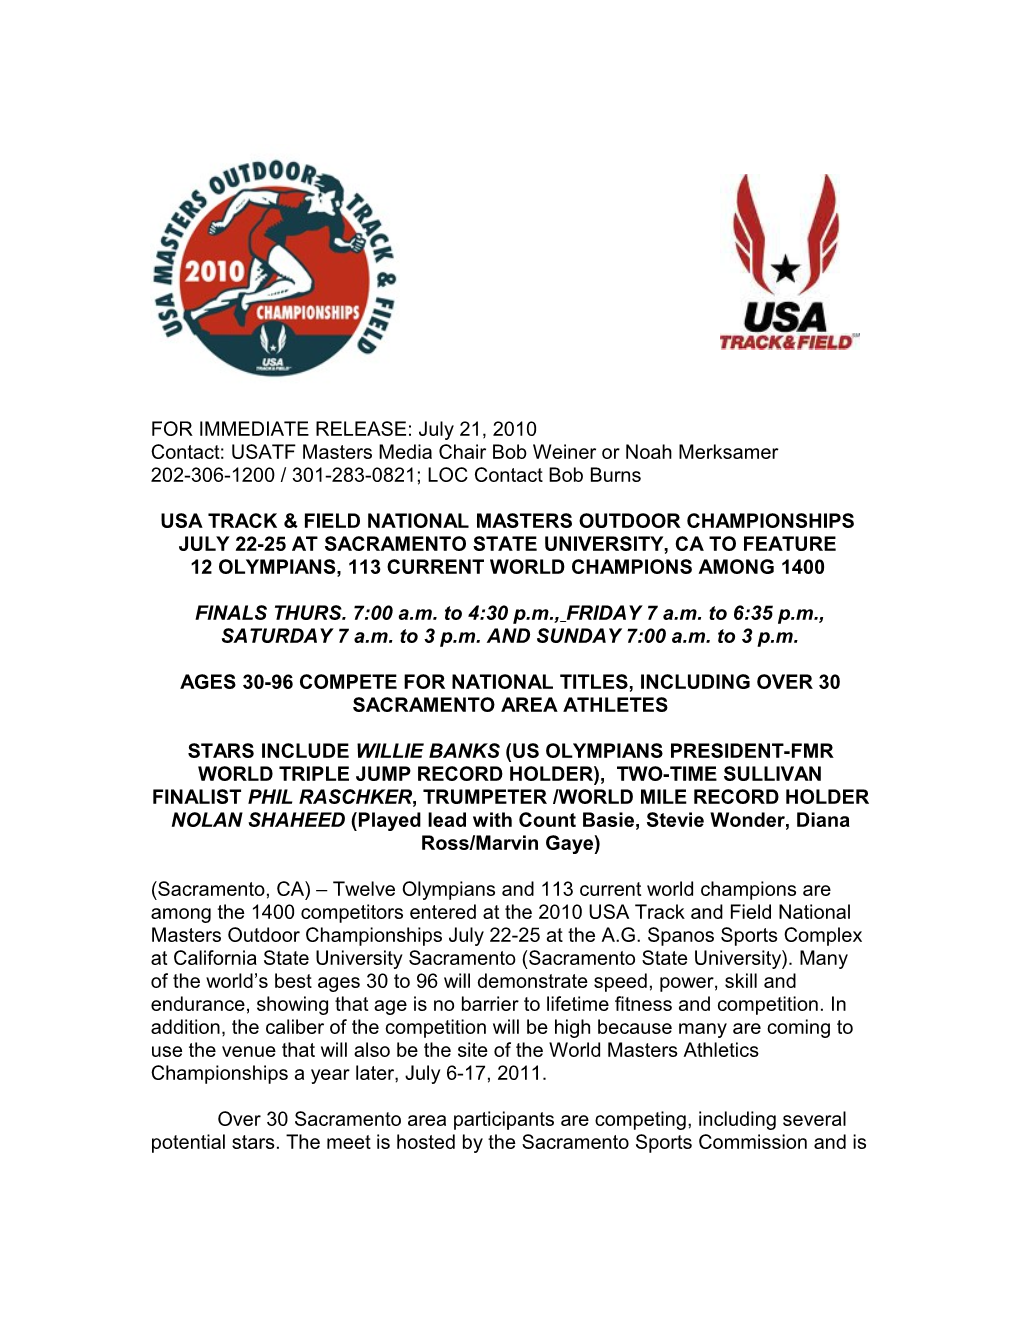 National Masters 2010 Outdoor Press Release